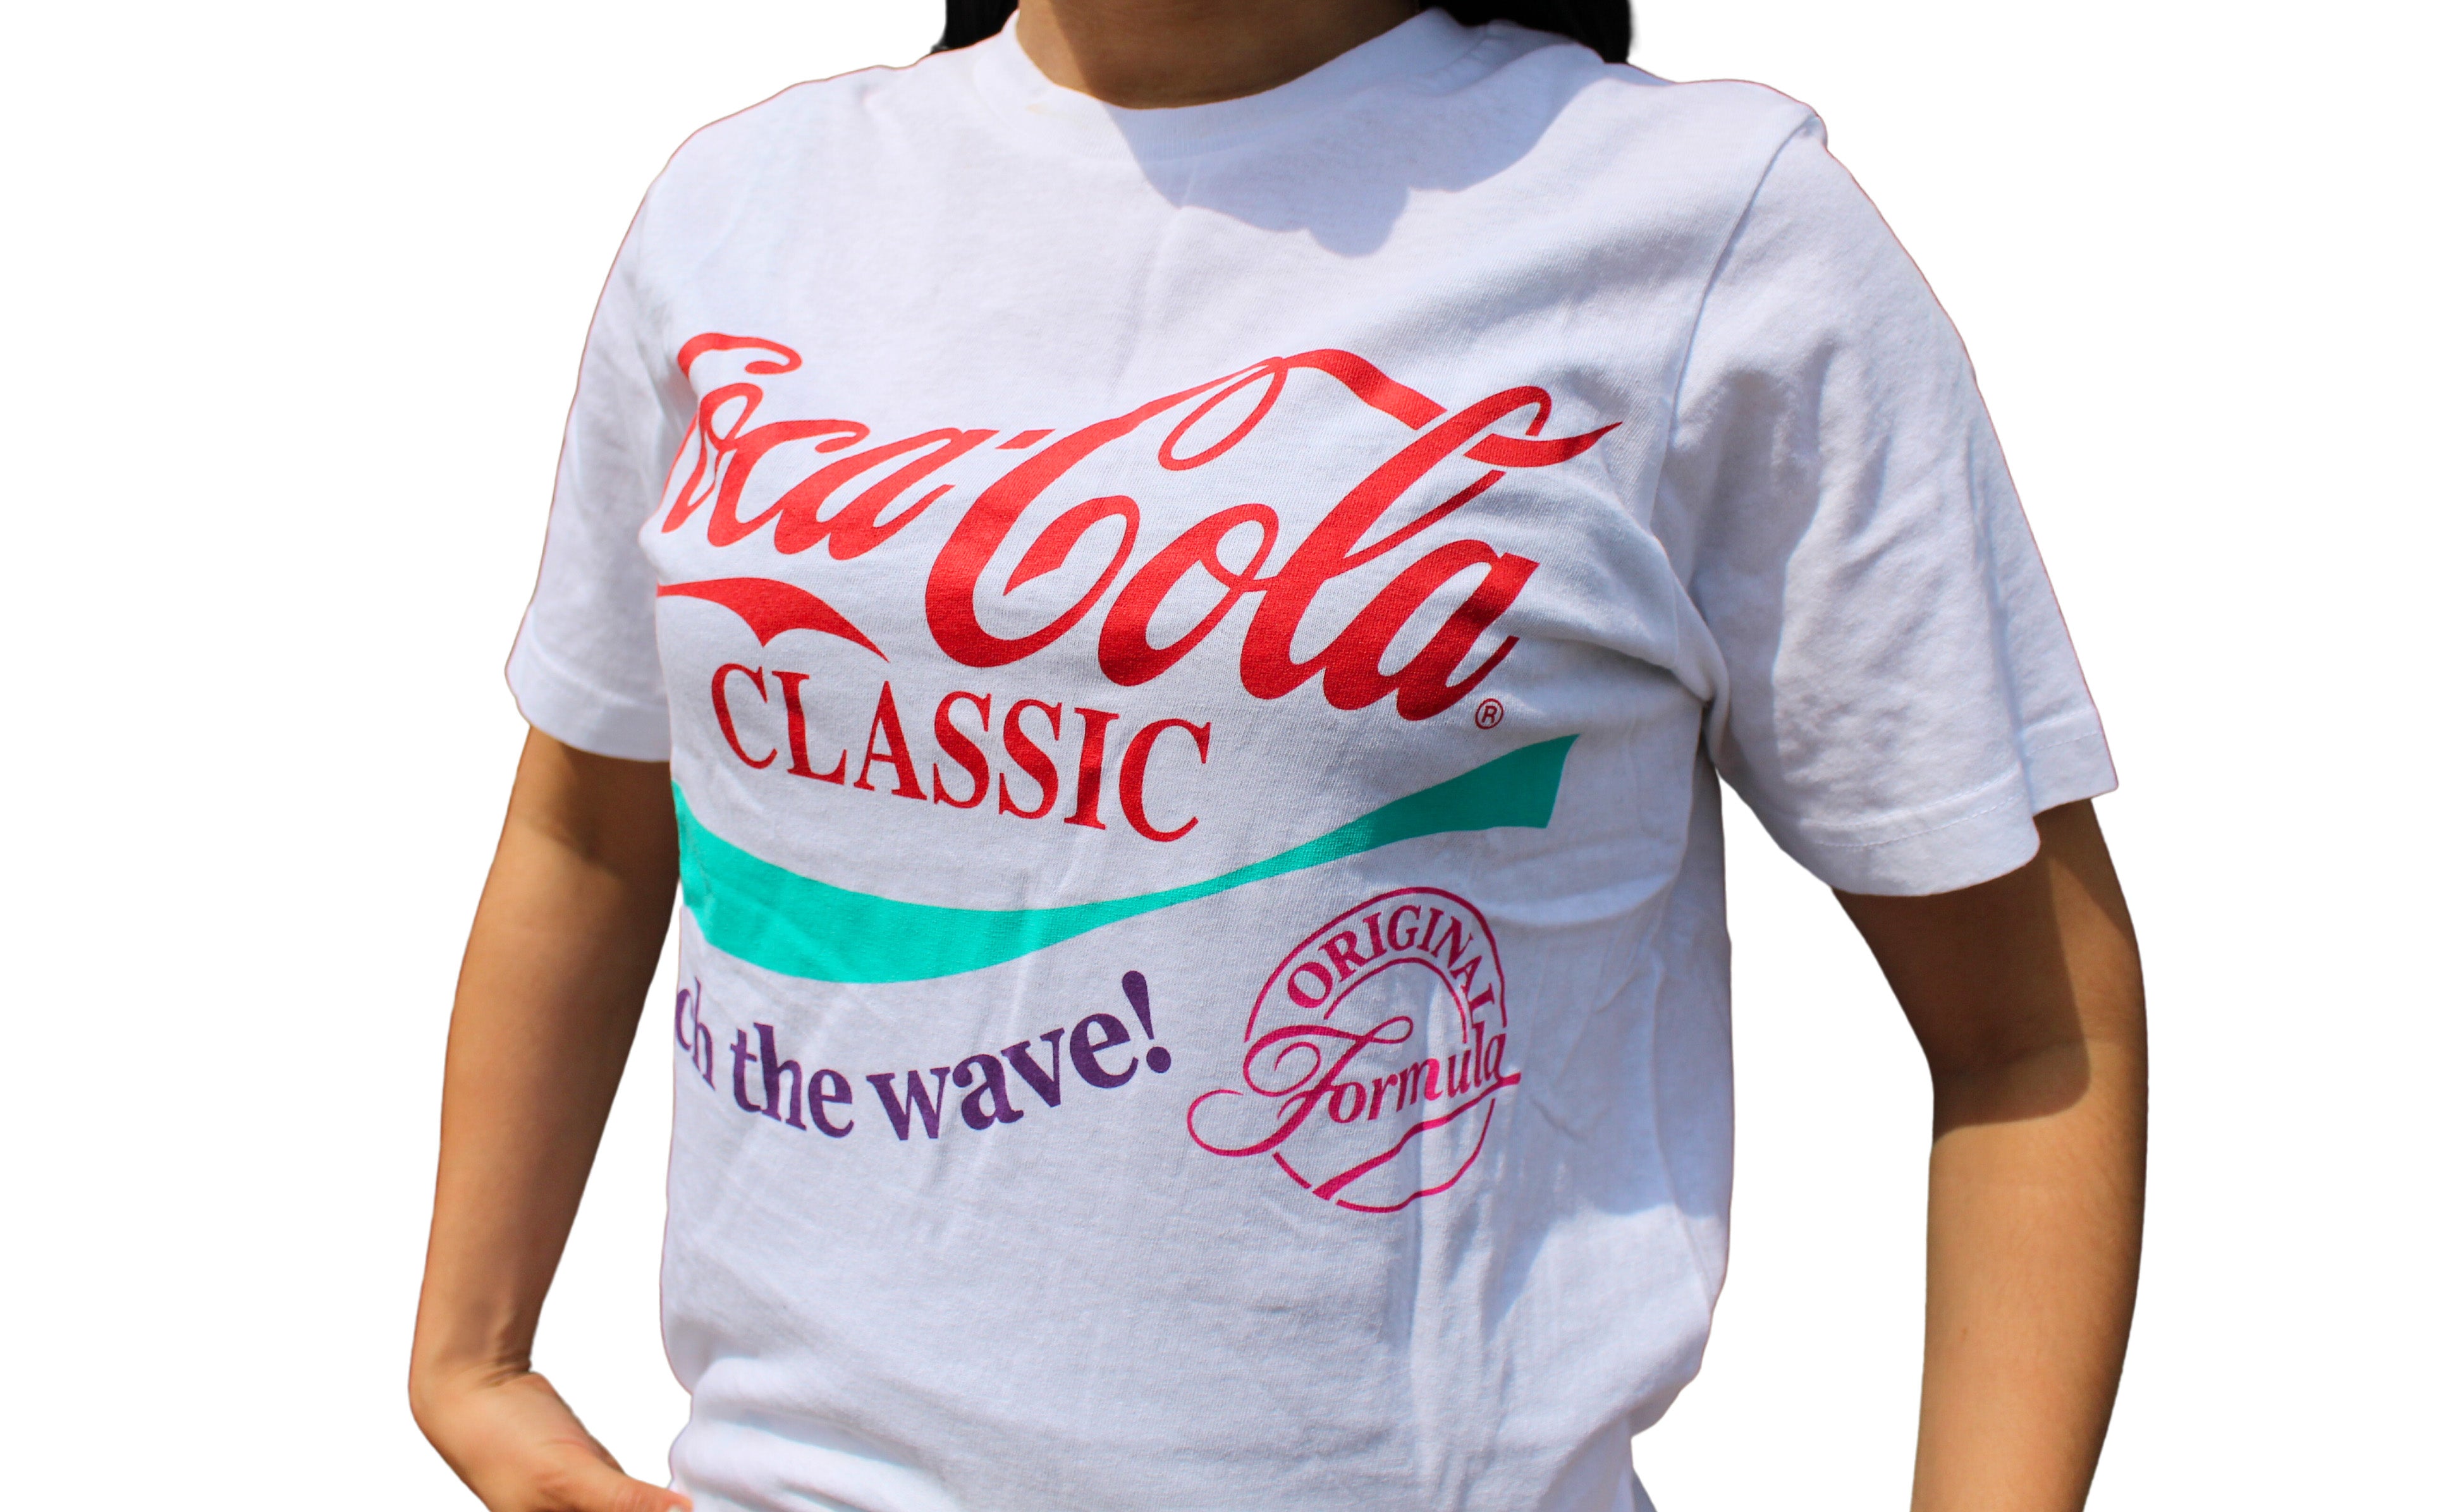 Cocal Cola 90's shirt on model front/side angle view